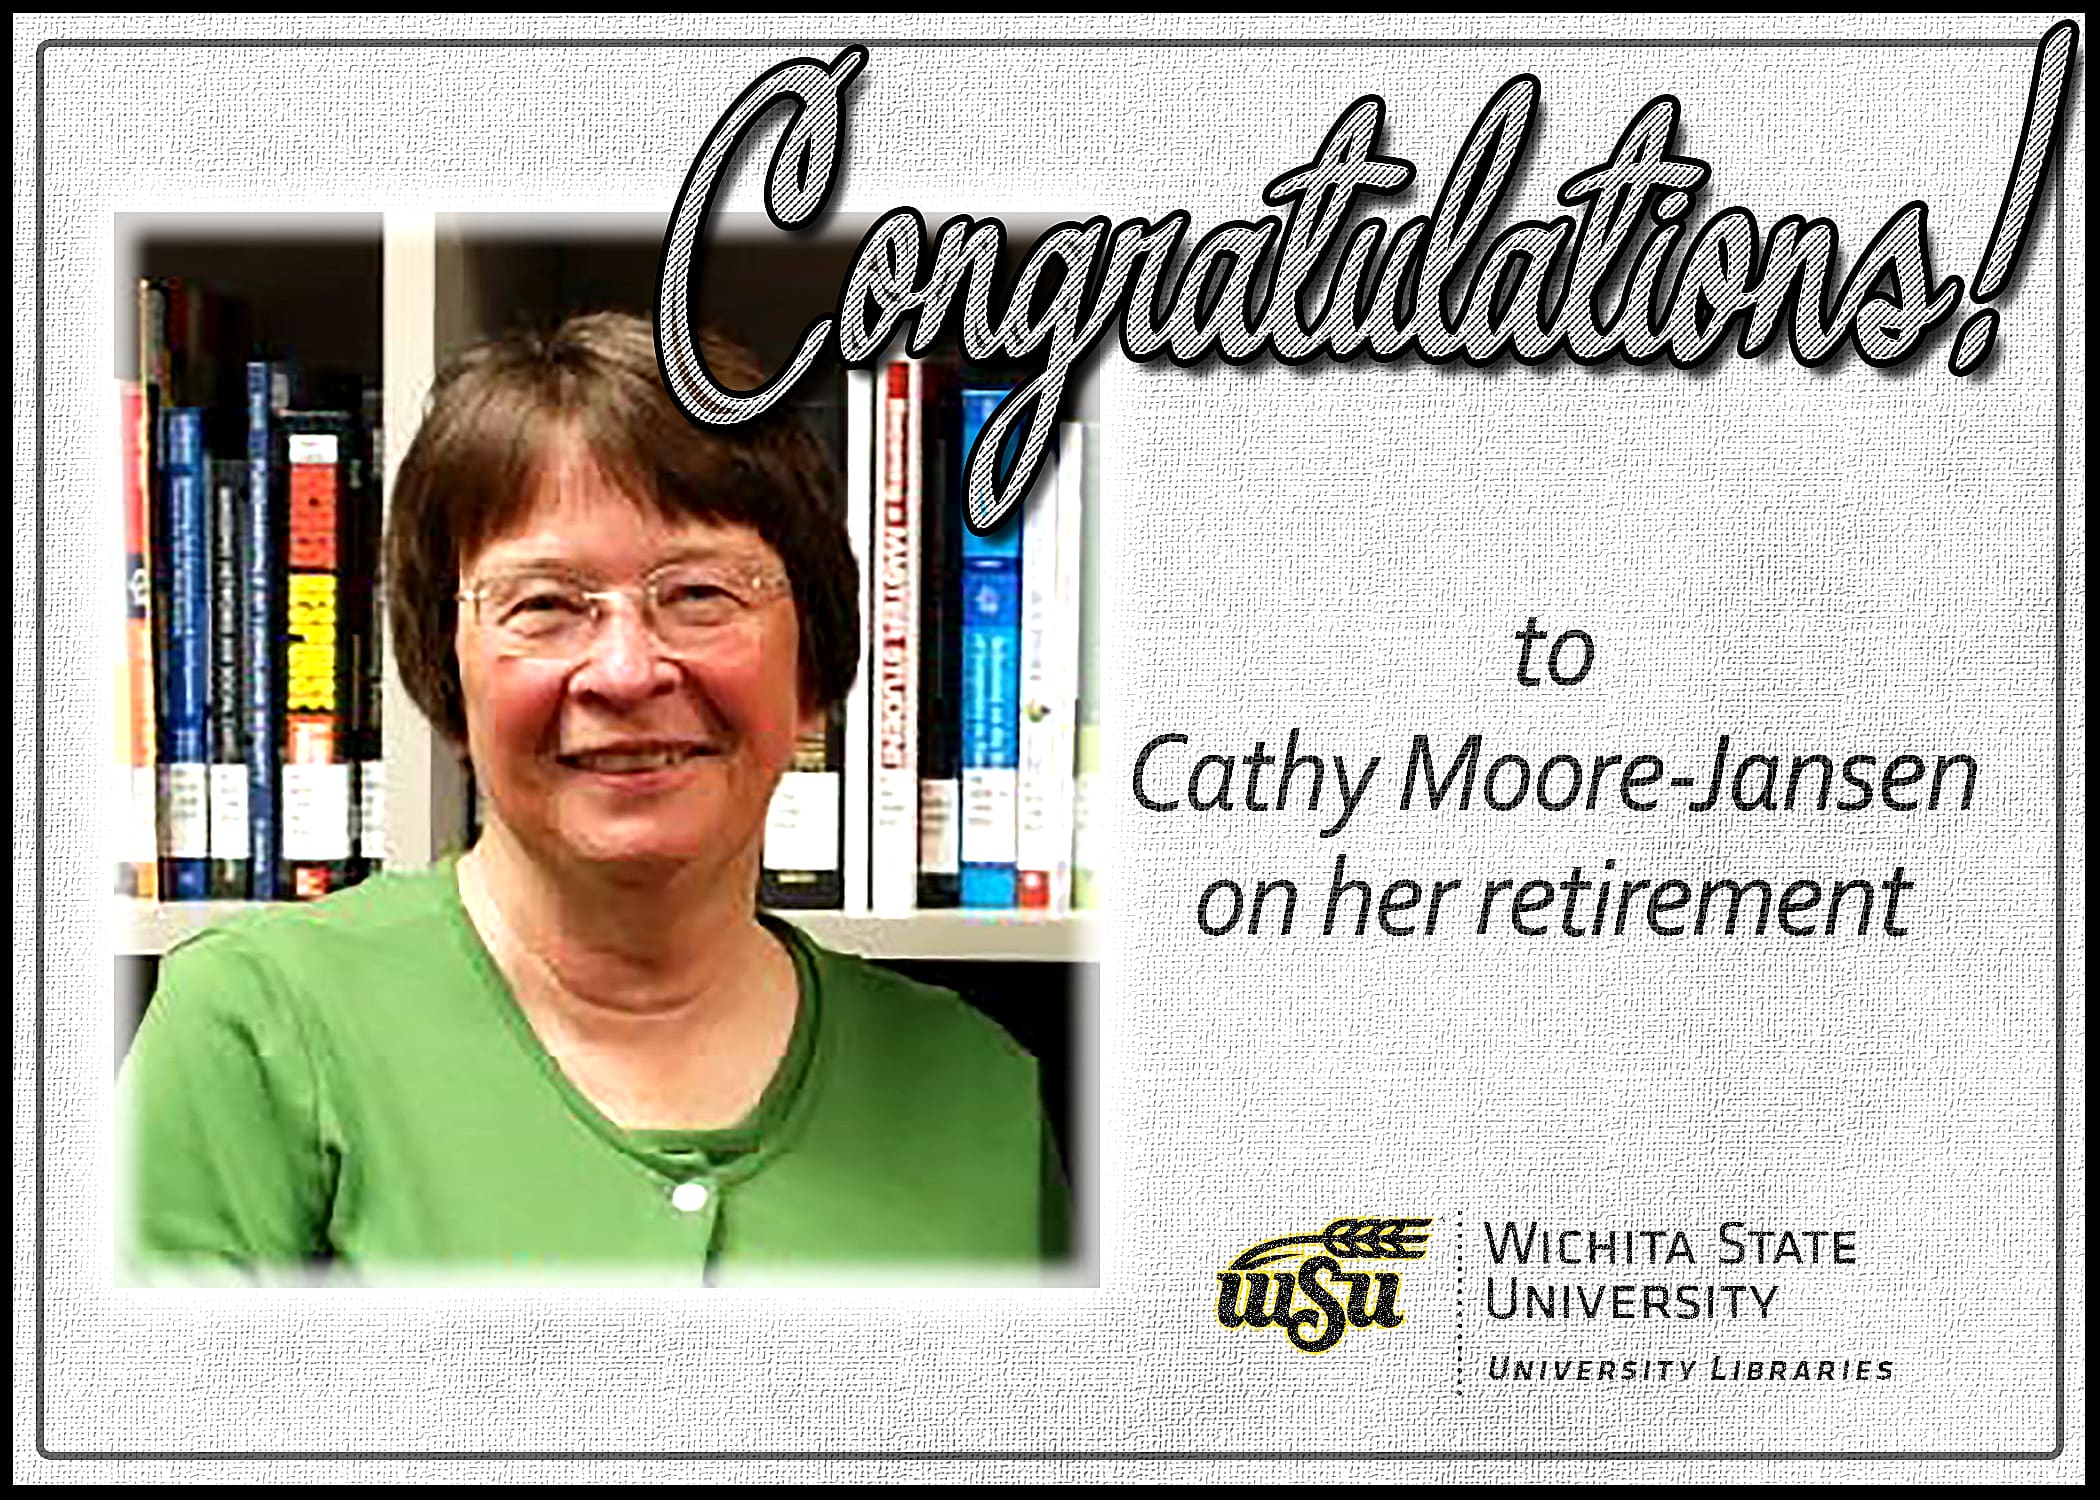 Congratulations to Cathy Moore-Jansen on her retirement!